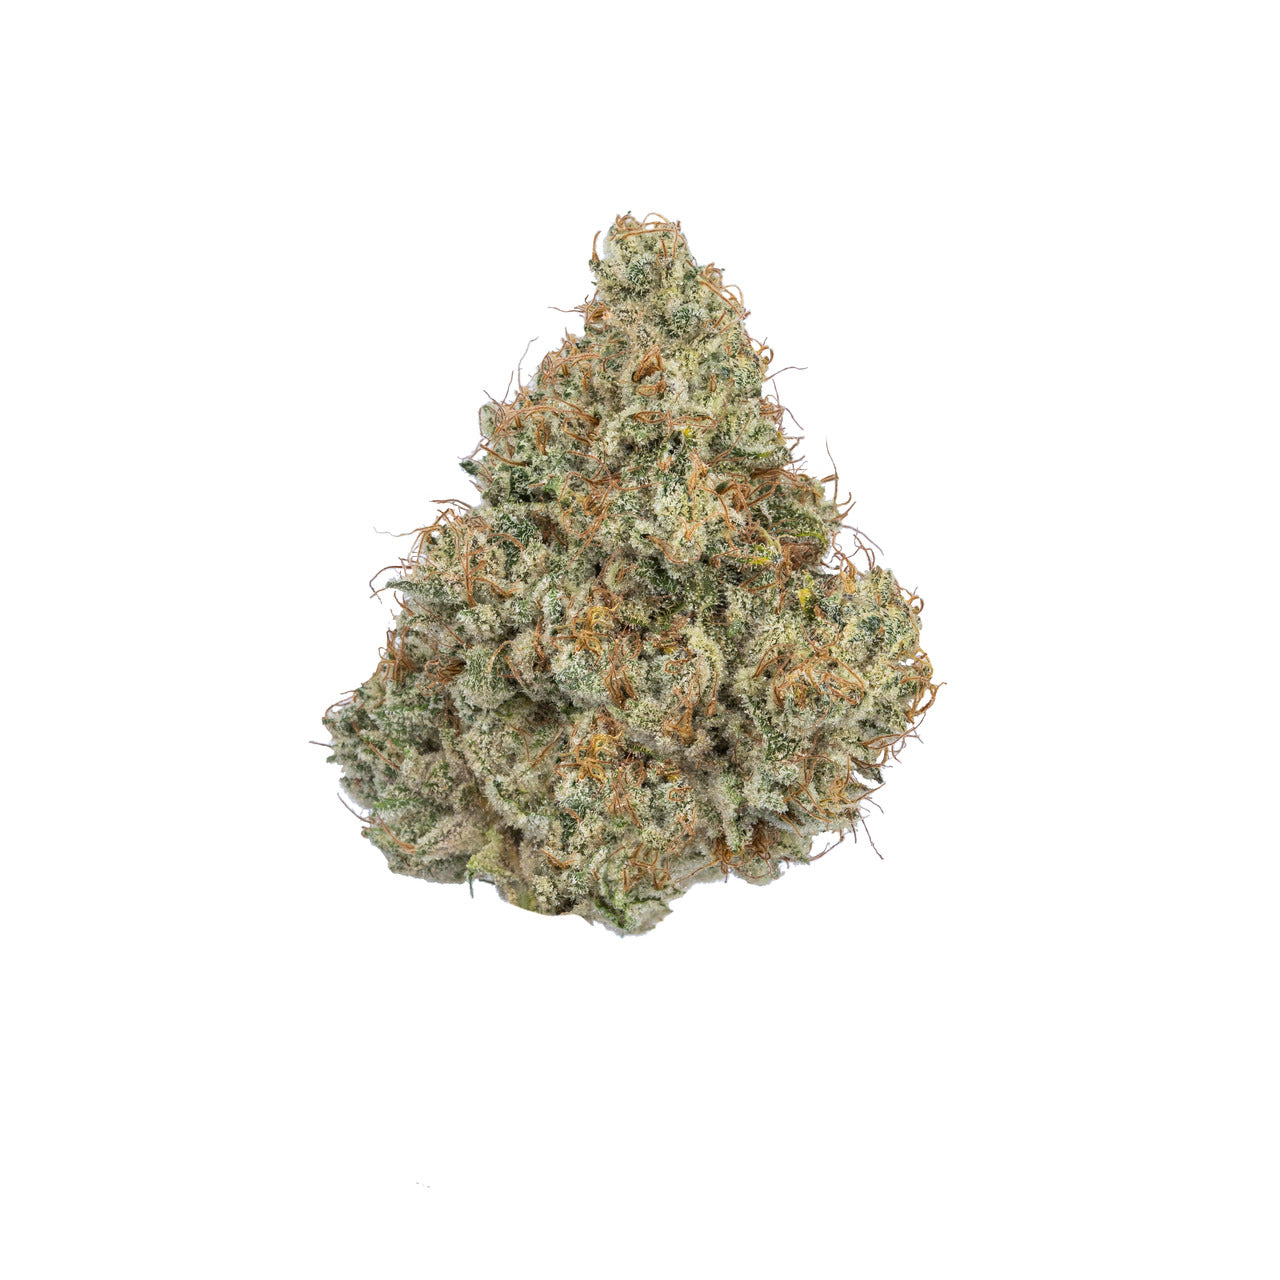 A strawberry-shaped nug of cannabis flower from the Strawnana weed strain sits in front of a white background.